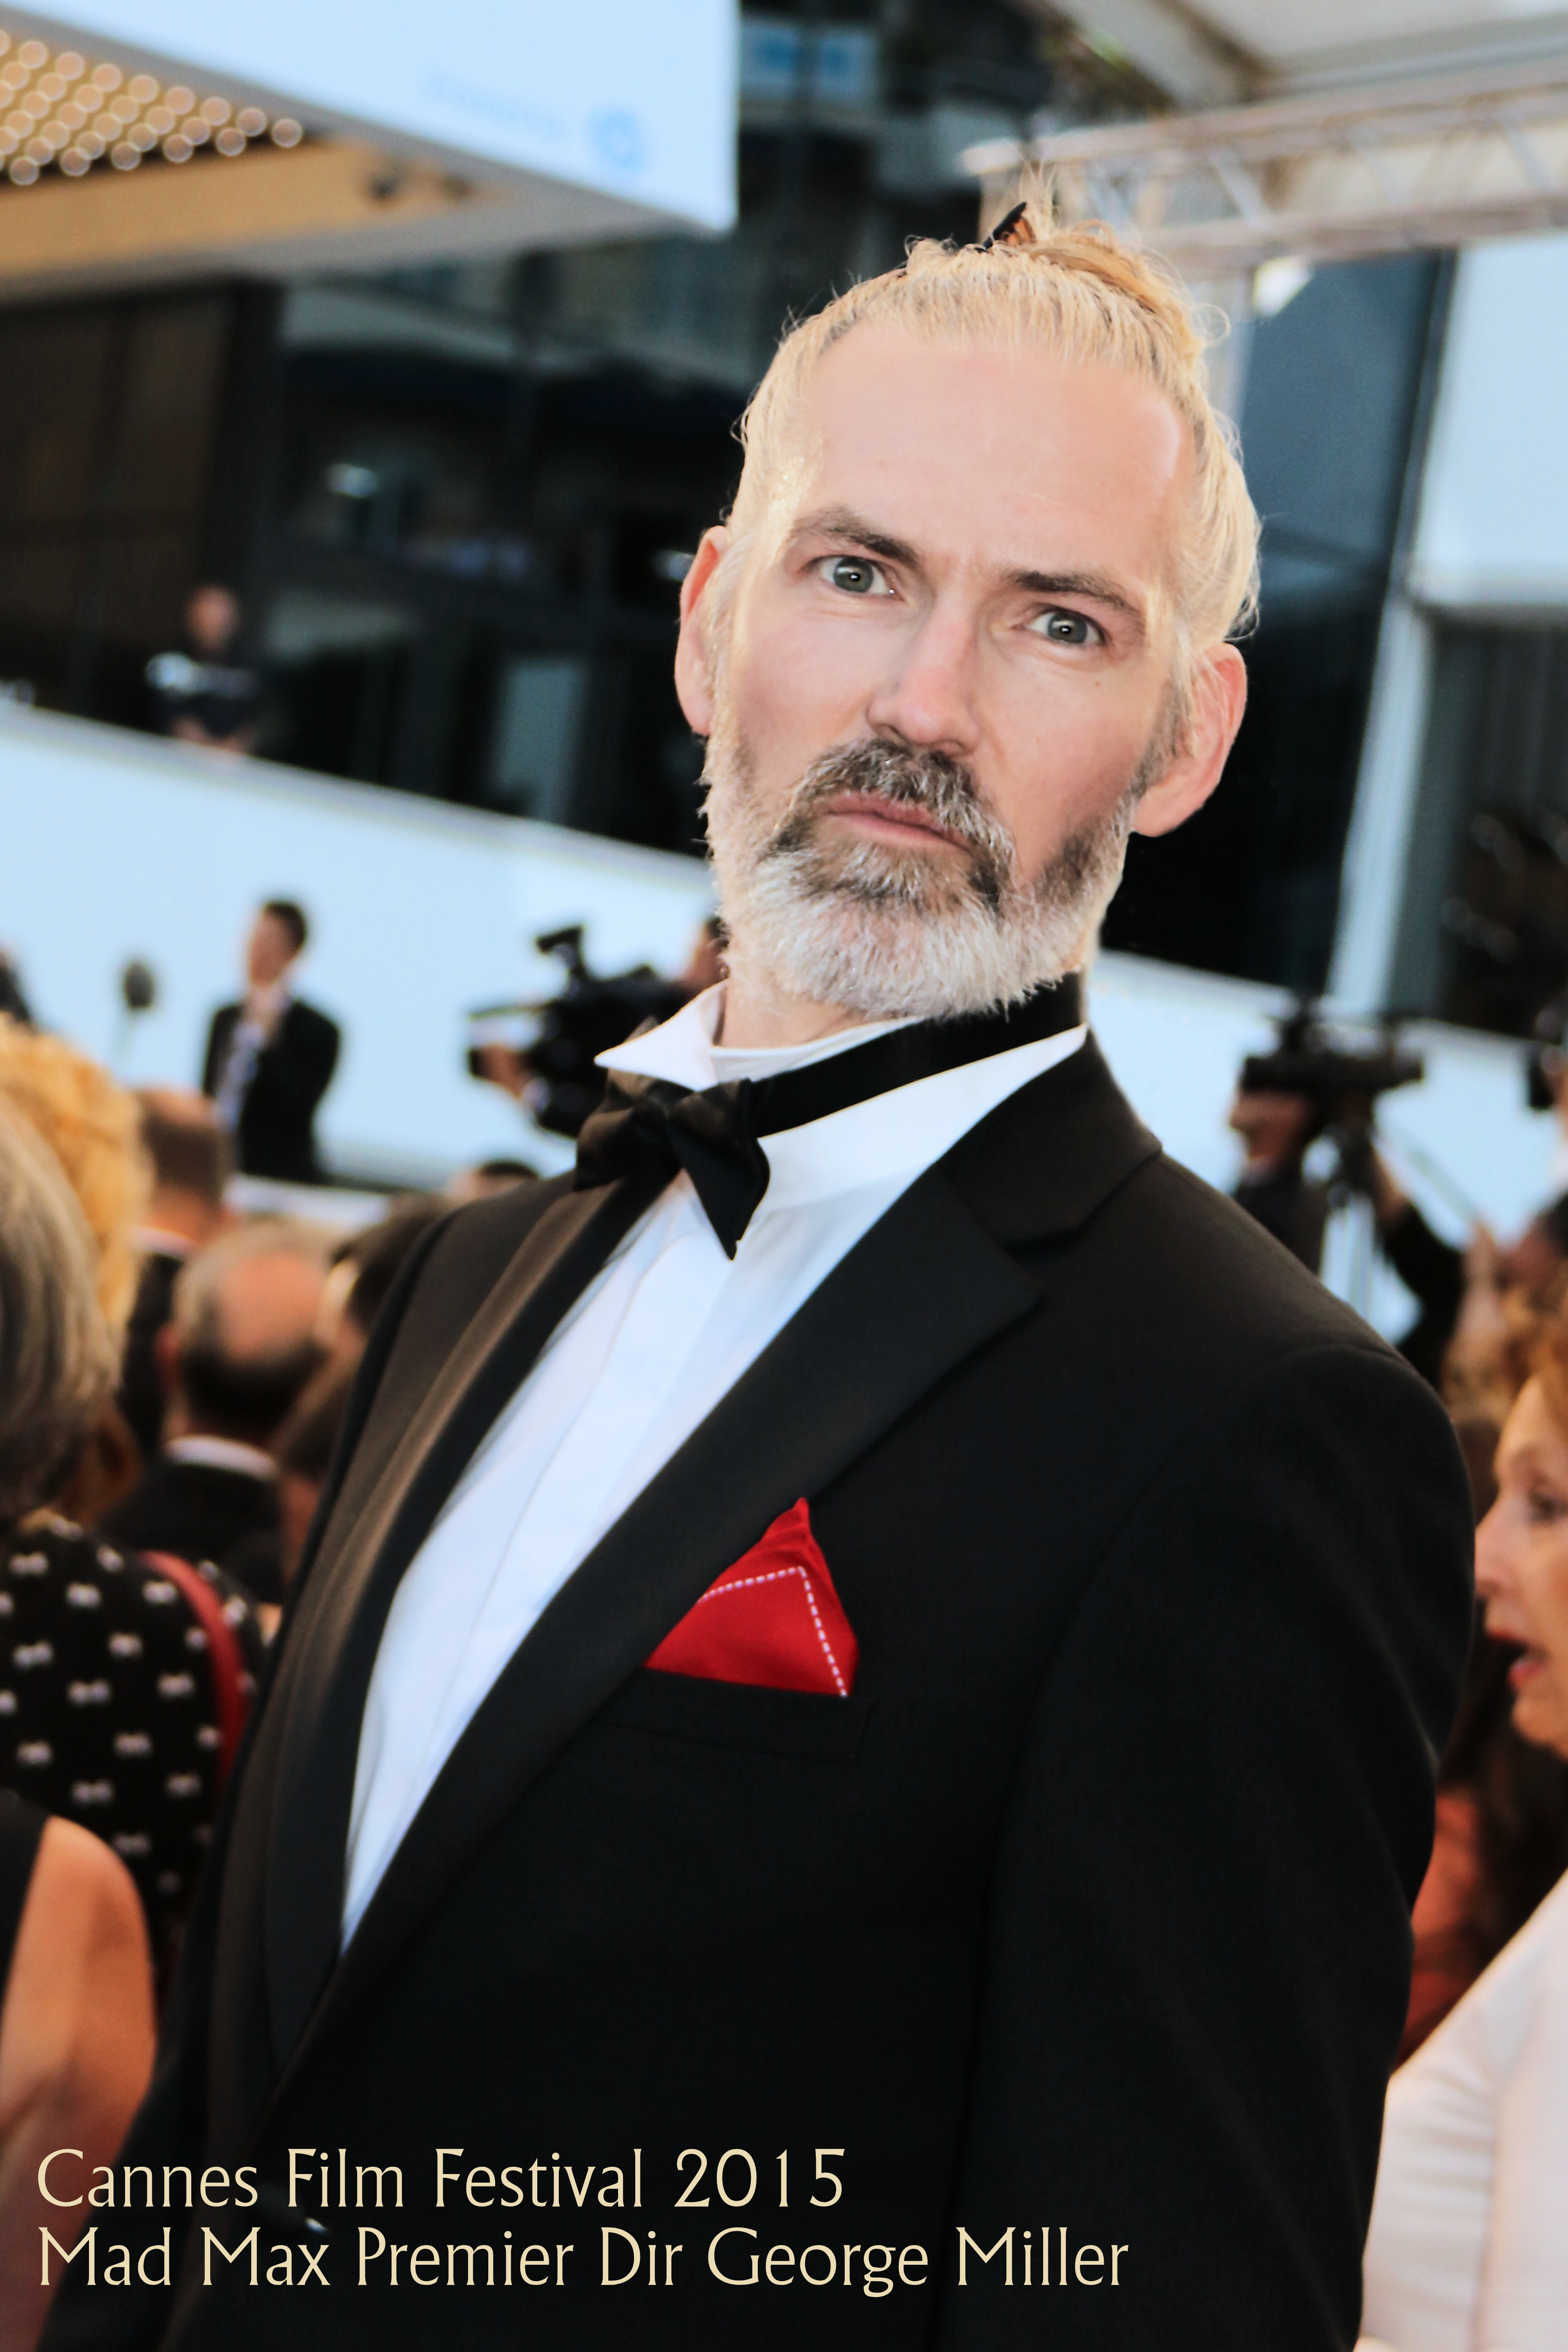 Jon at the Cannes premiere of Mad Max Fury Road